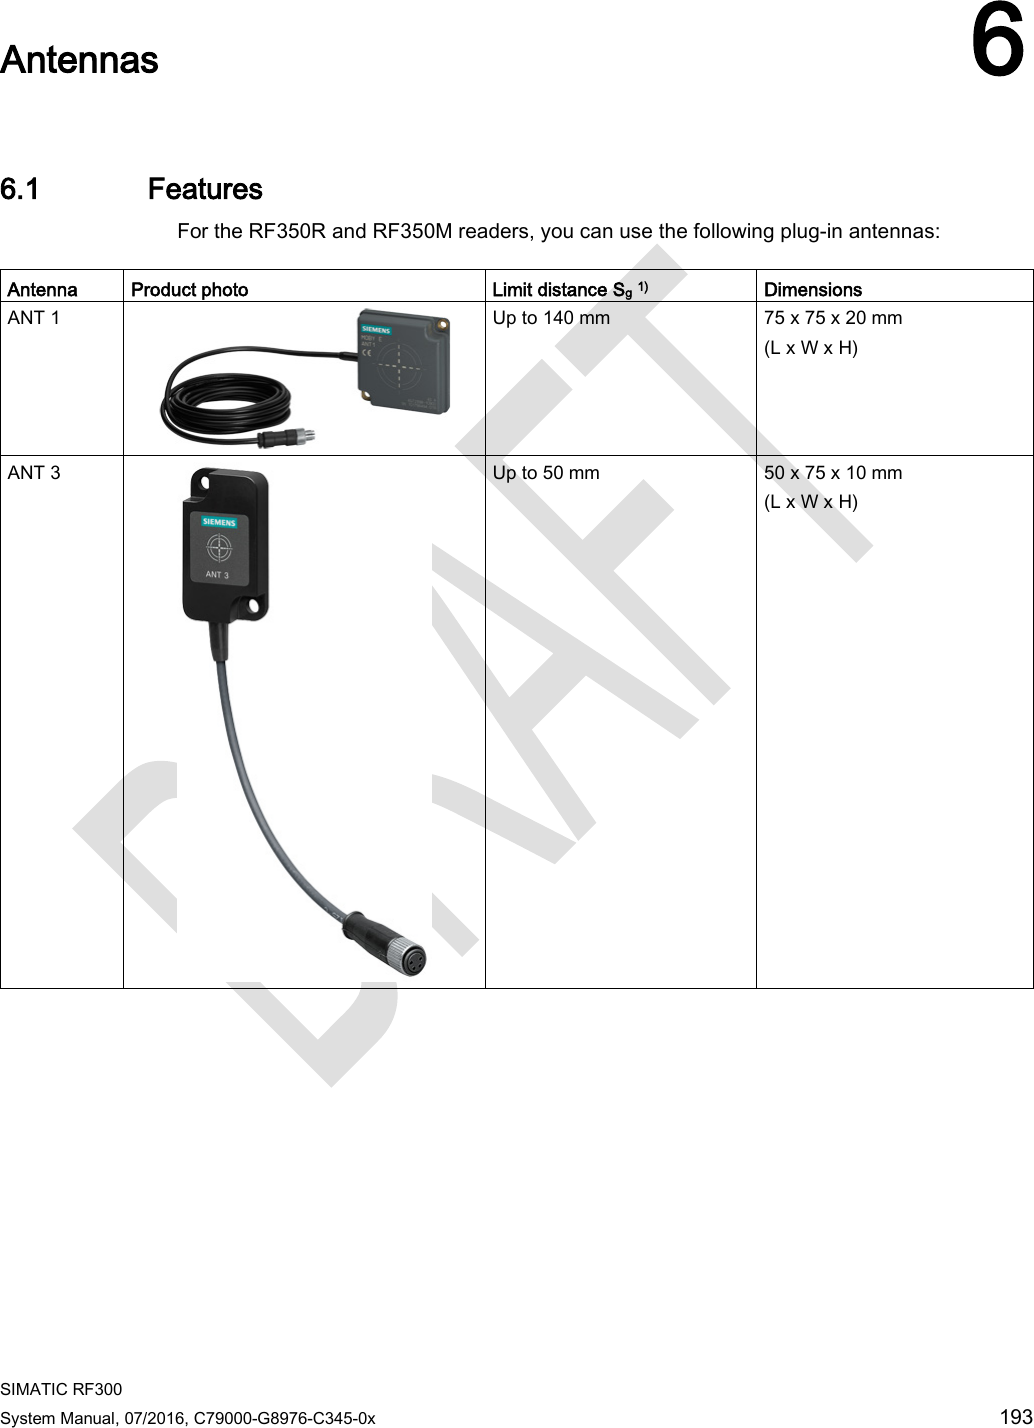  SIMATIC RF300 System Manual, 07/2016, C79000-G8976-C345-0x 193  Antennas 6 6.1 Features For the RF350R and RF350M readers, you can use the following plug-in antennas:  Antenna Product photo Limit distance Sg 1) Dimensions ANT 1  Up to 140 mm 75 x 75 x 20 mm (L x W x H) ANT 3  Up to 50 mm 50 x 75 x 10 mm (L x W x H) 